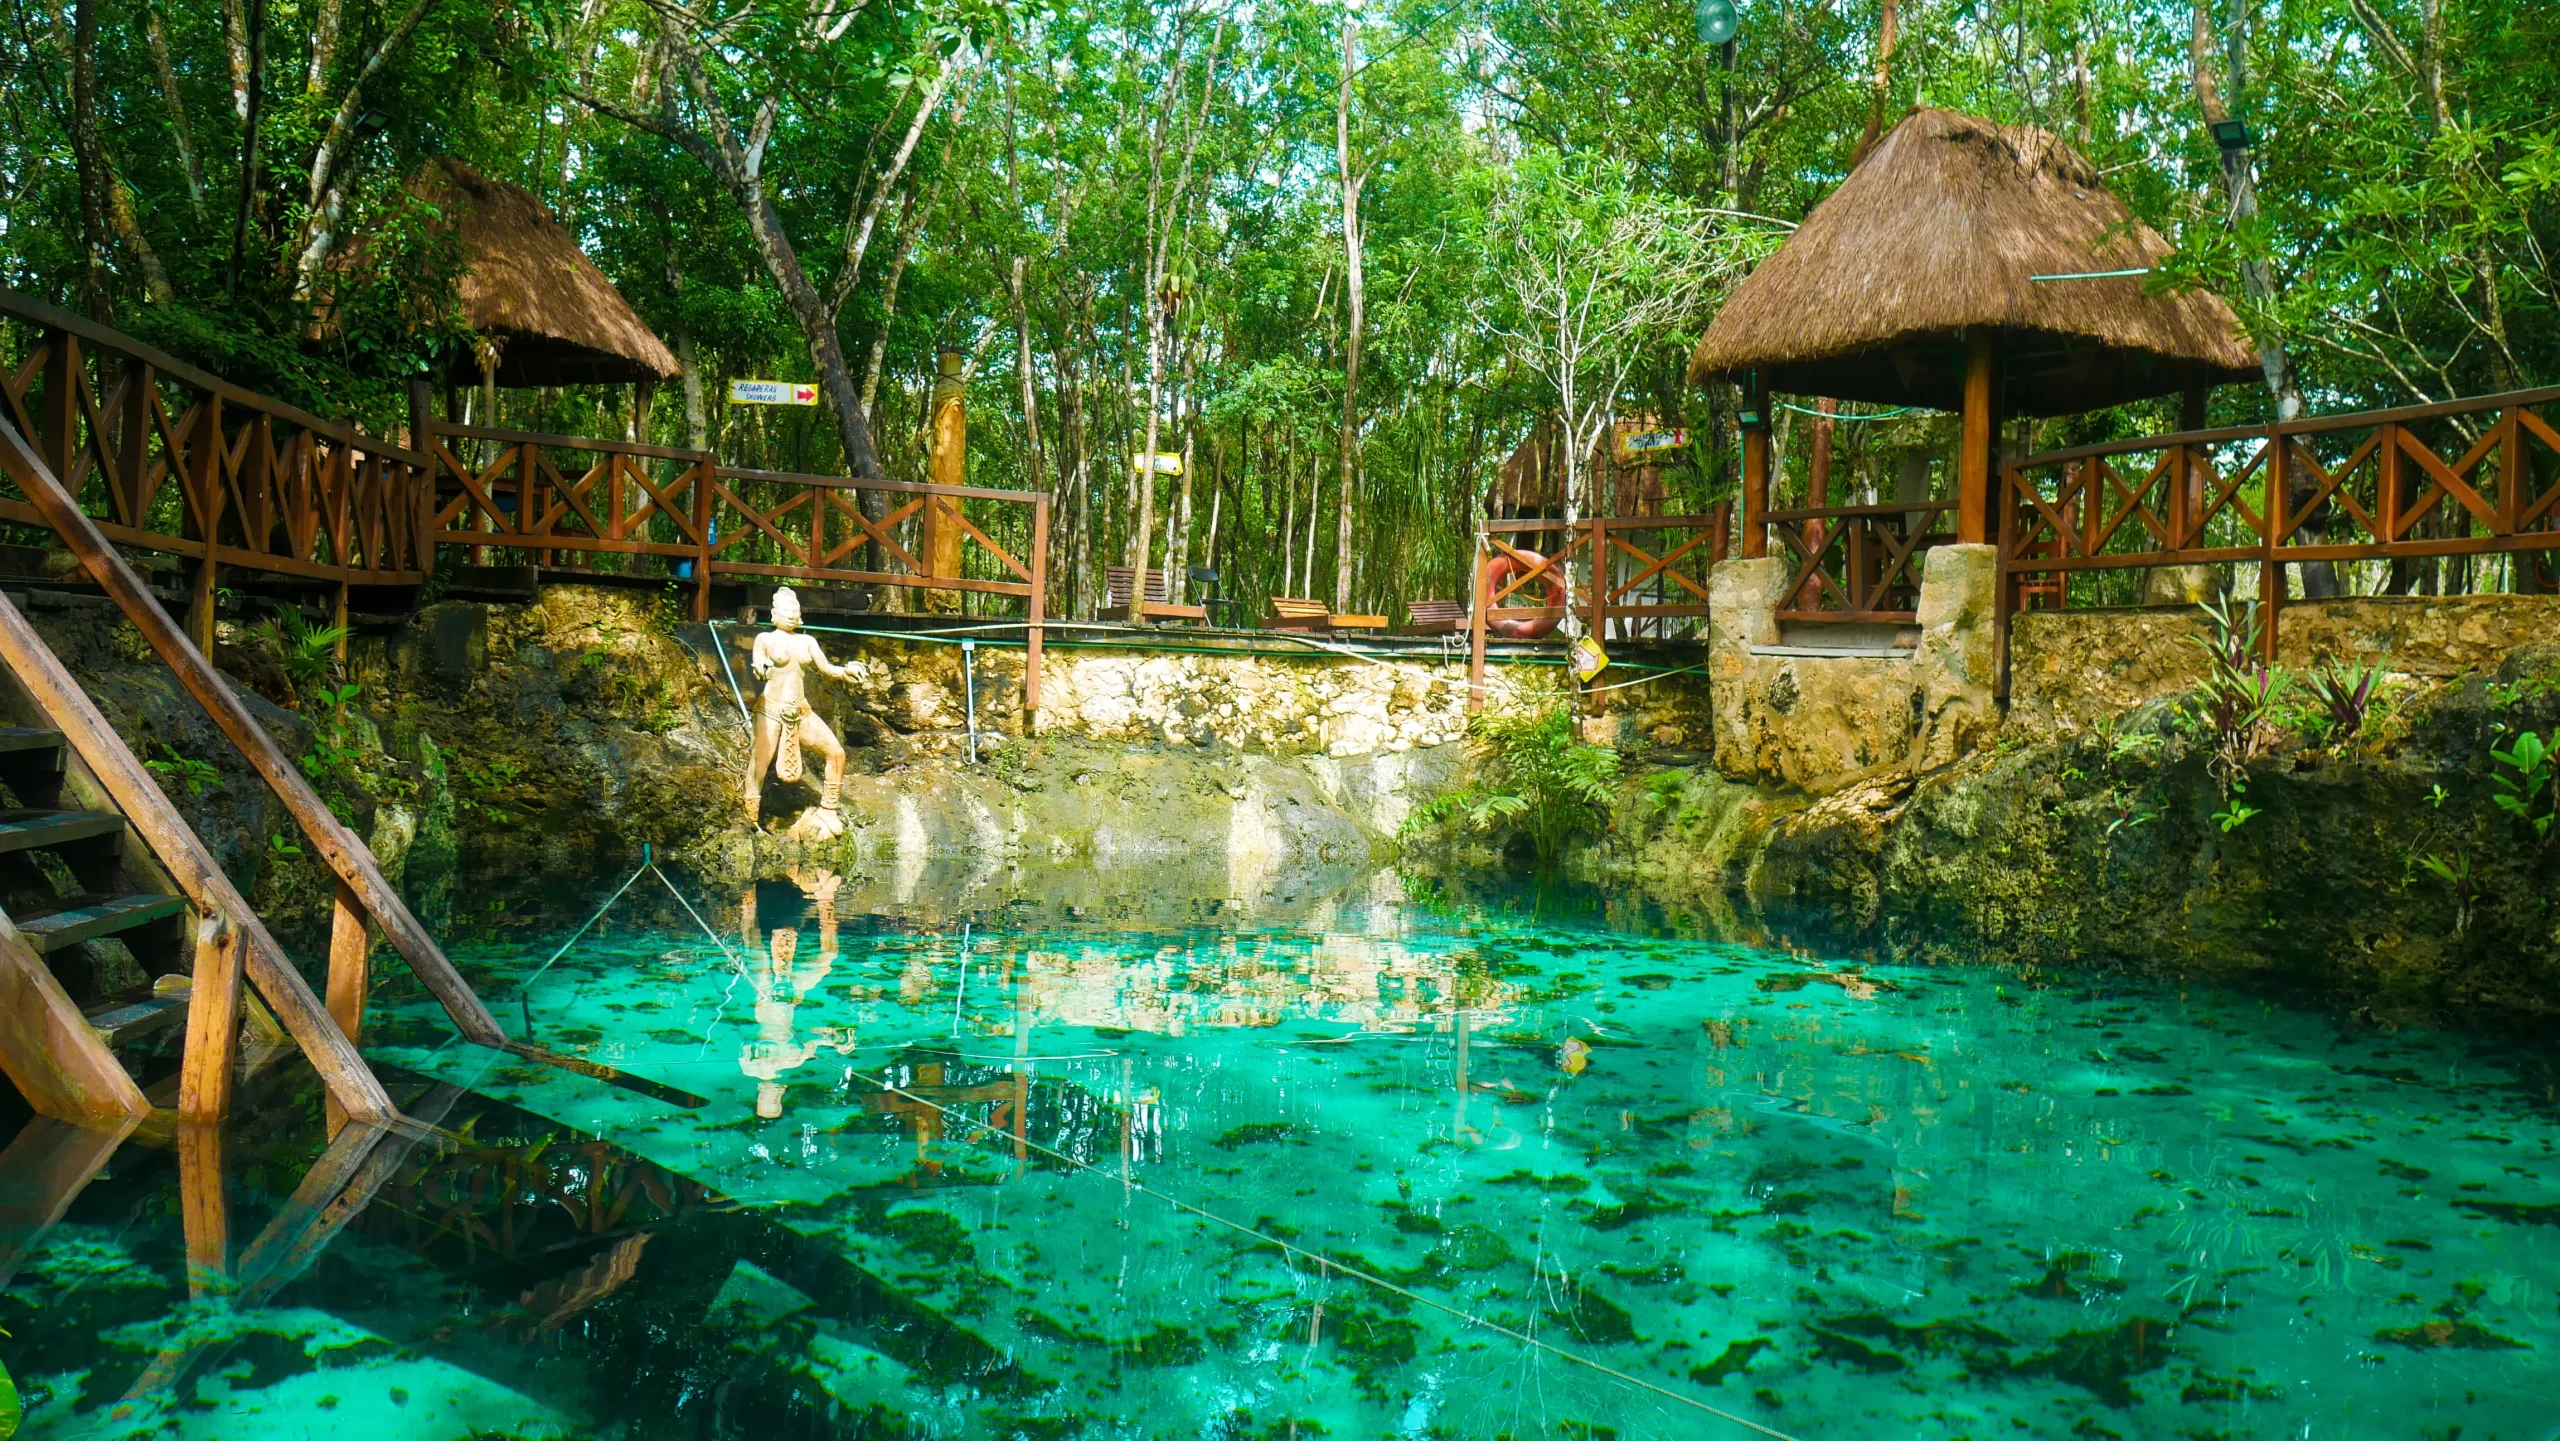 Cancun Cenotes - Things to do in Cancun